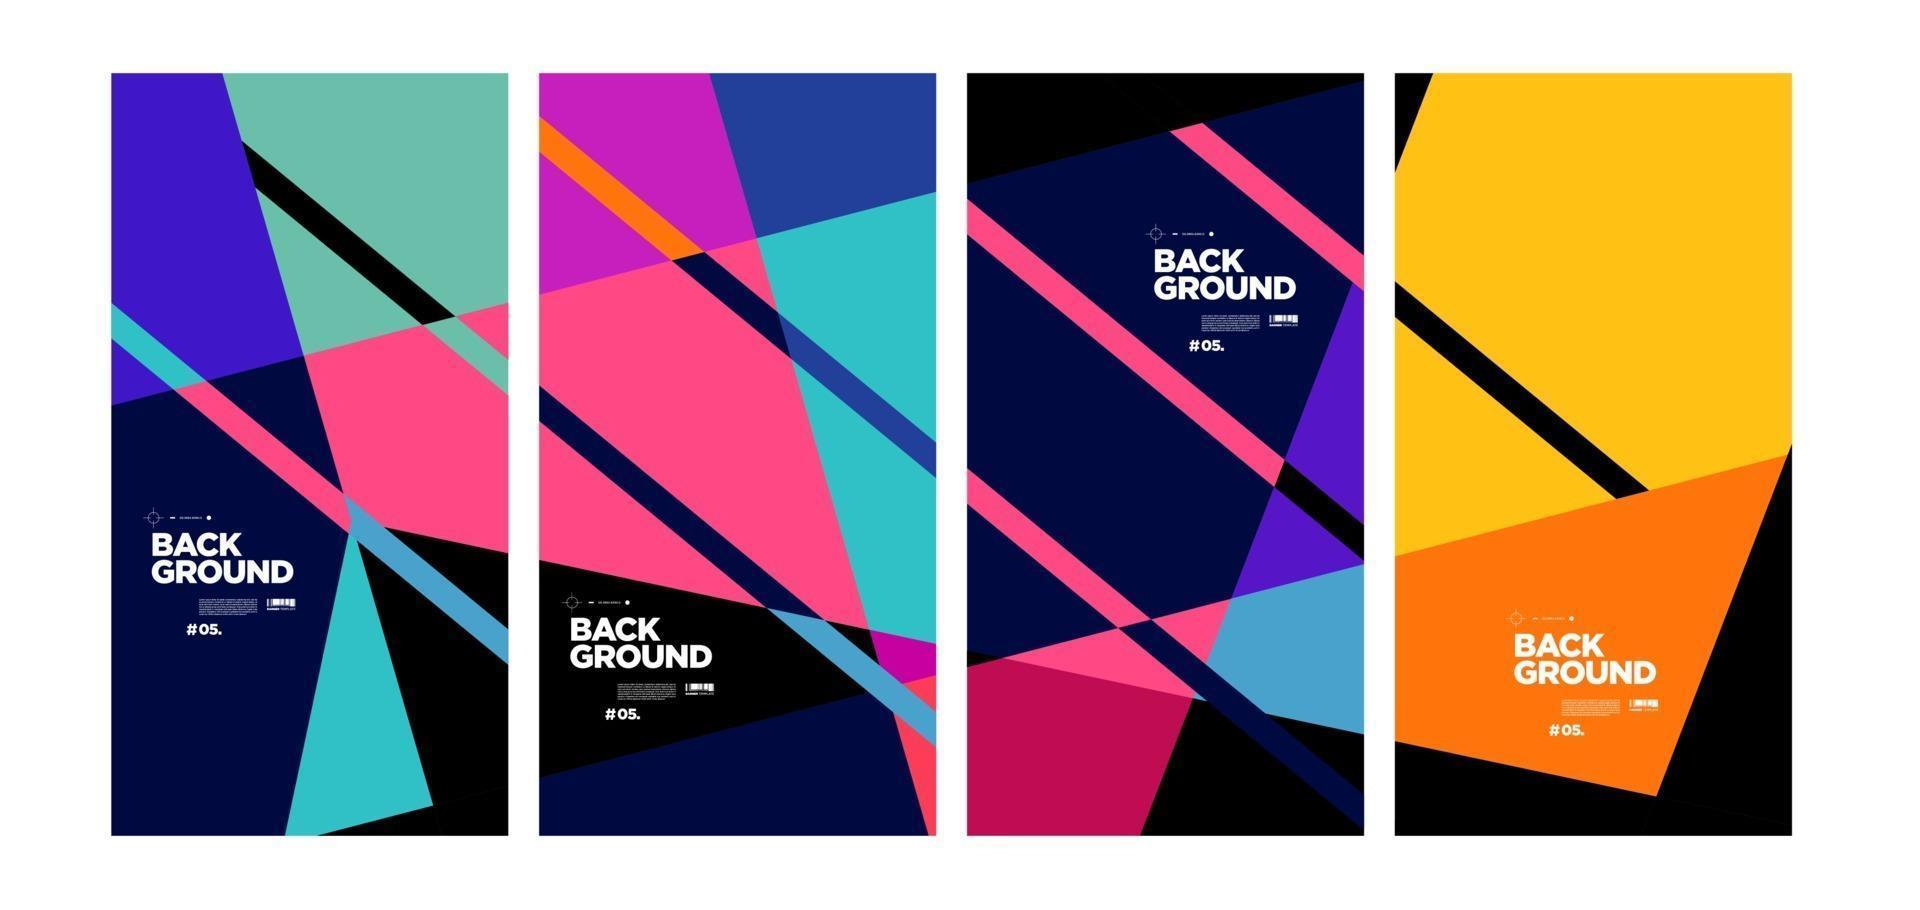 Vector colorful abstract geometric background for banner